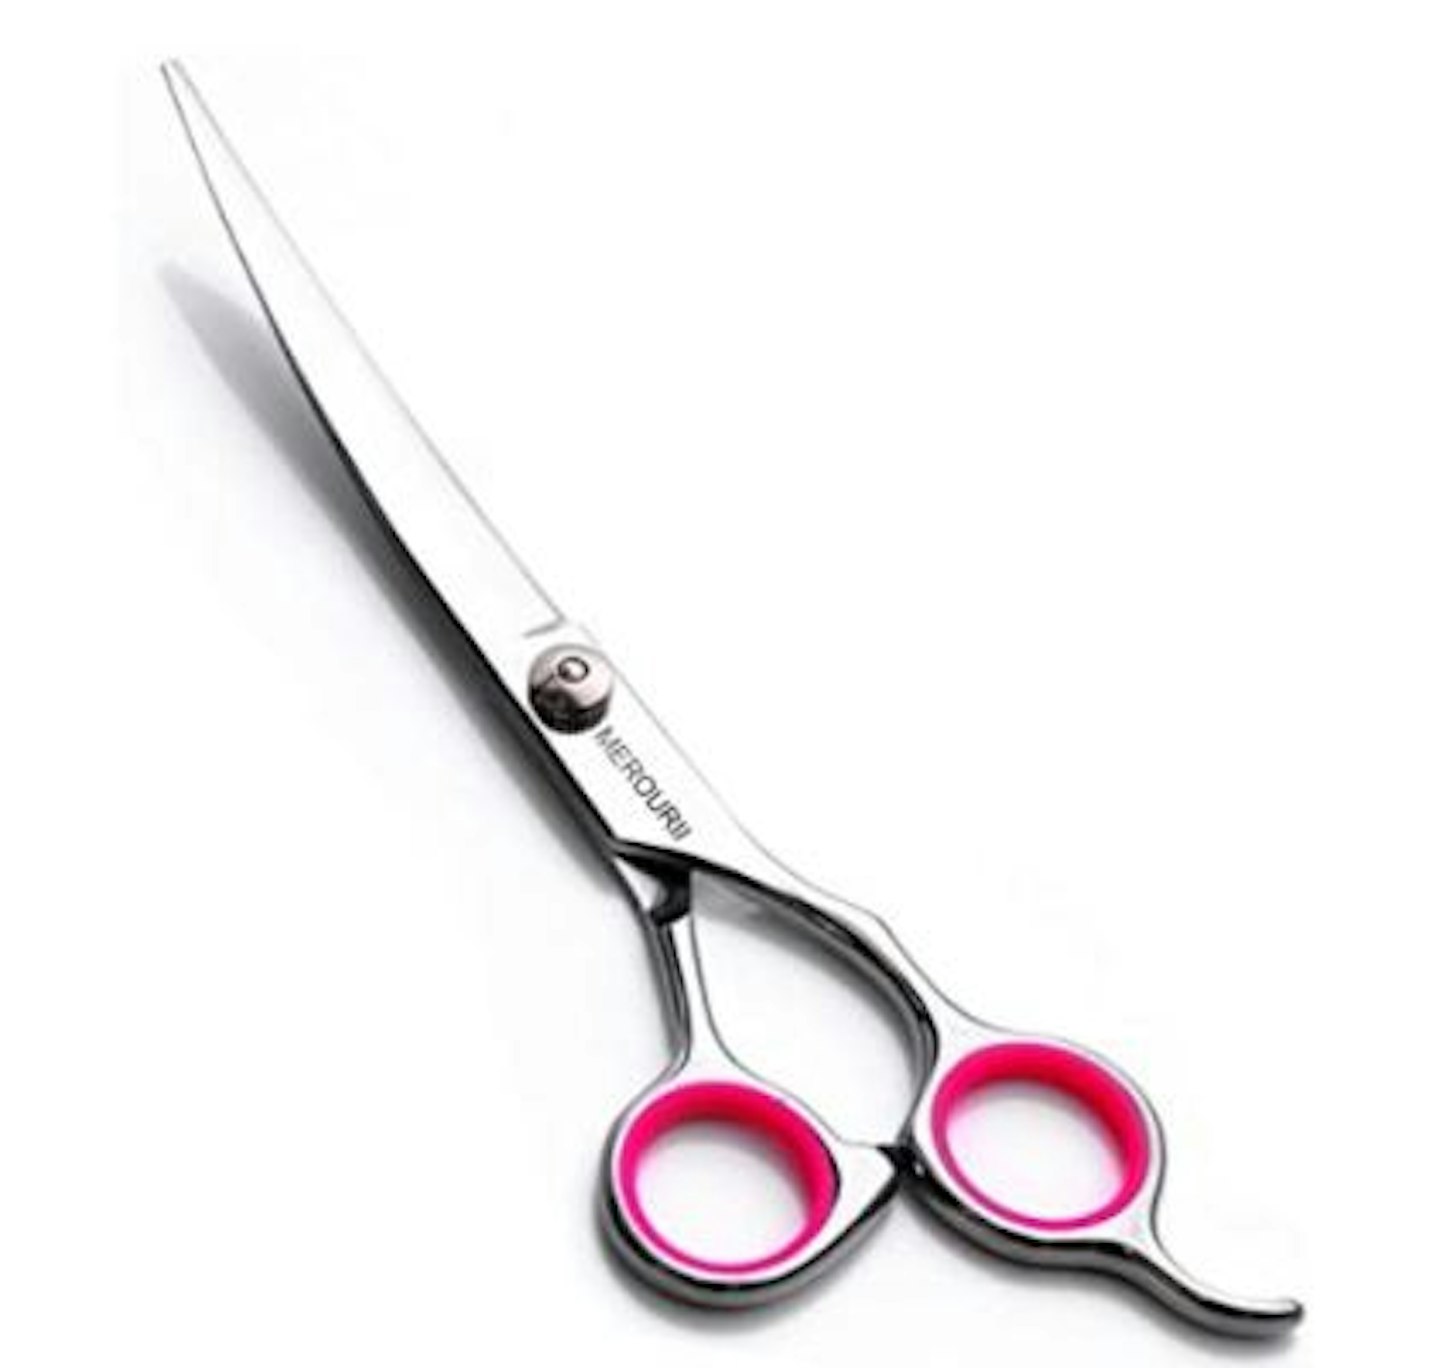 AILOVA 6 inch Stainless Steel Pet Grooming Curved Scissors